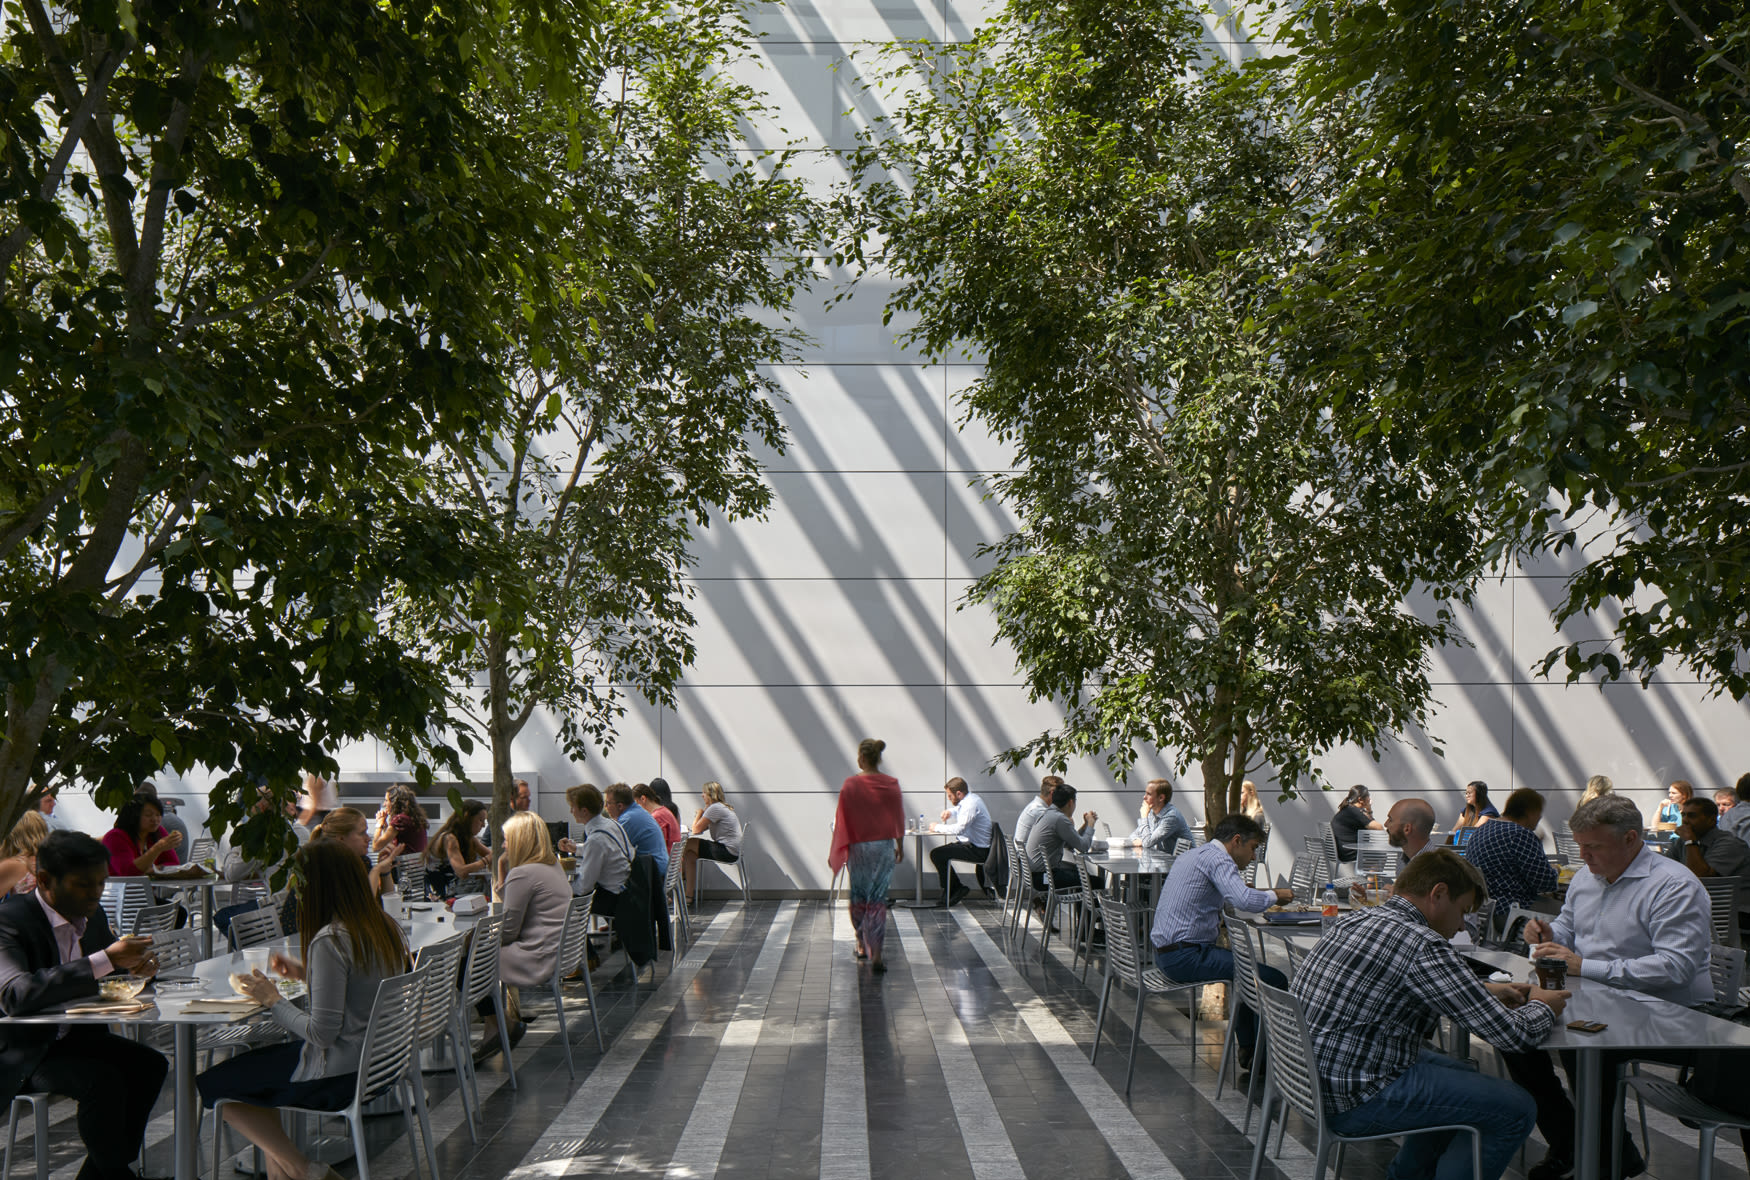 Within the tree lined spaces of the wintergarden pavilion